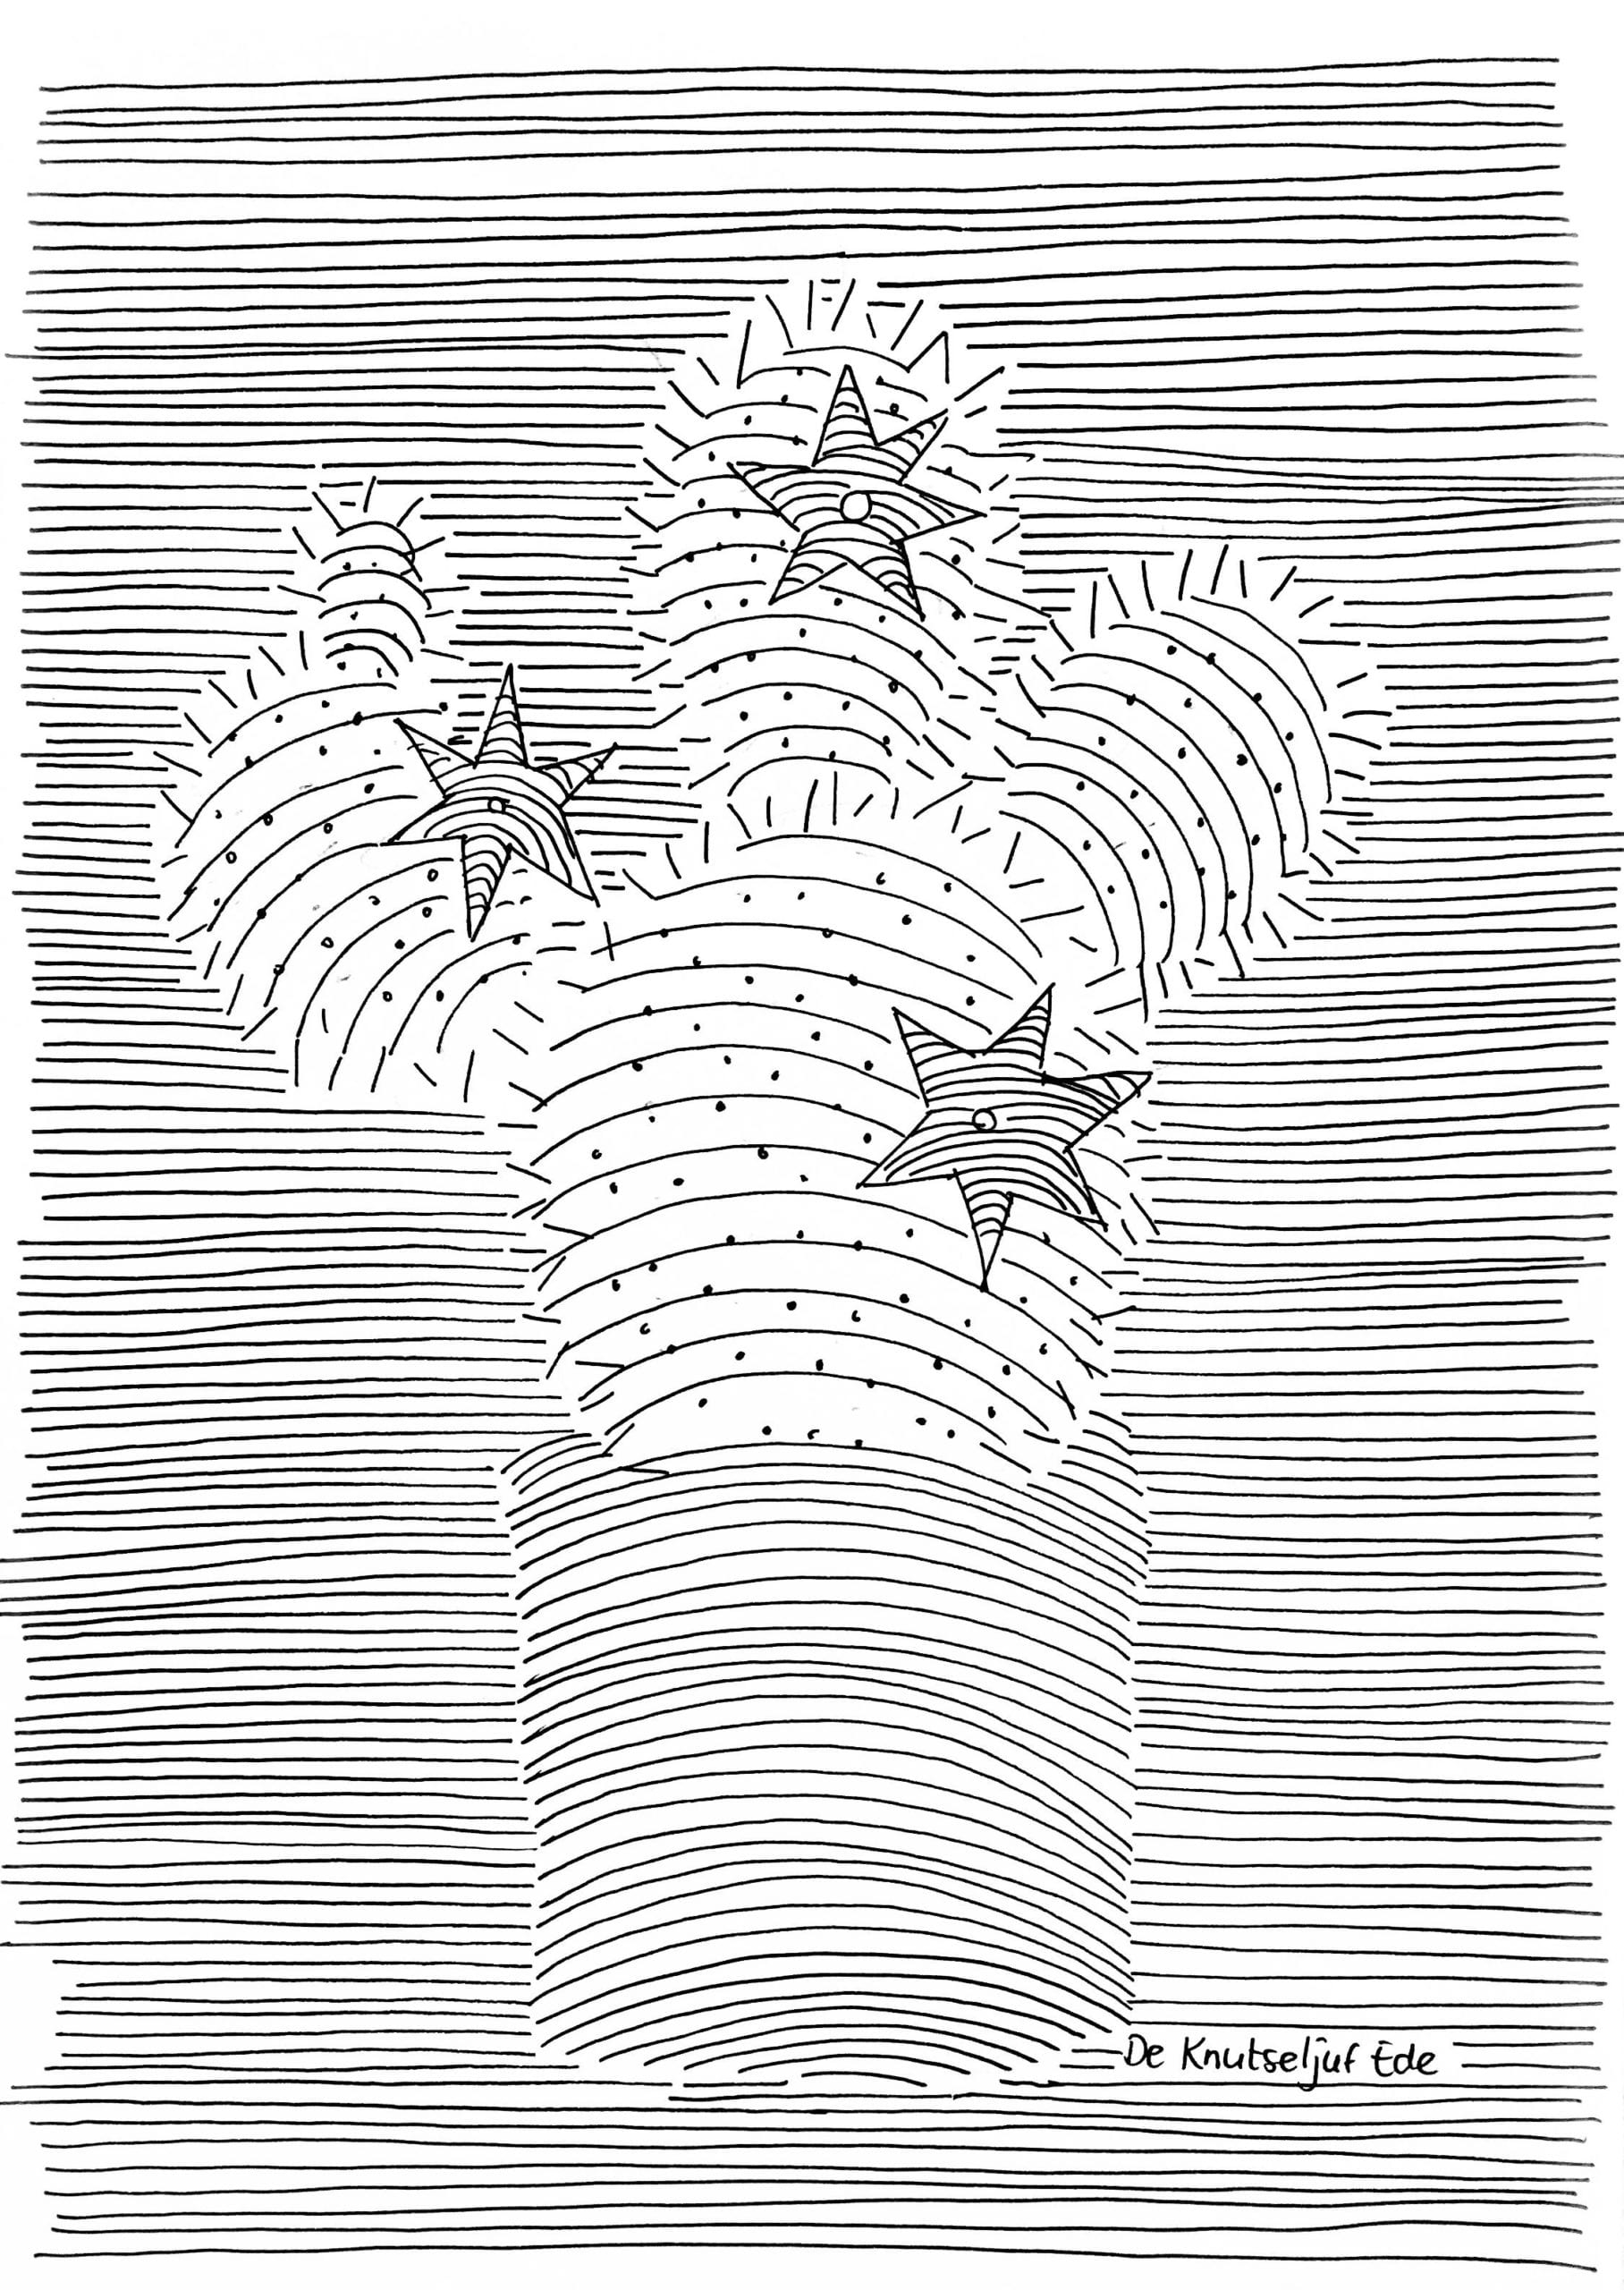 Example of a cactus for the parallel line drawing free online children’s art lesson